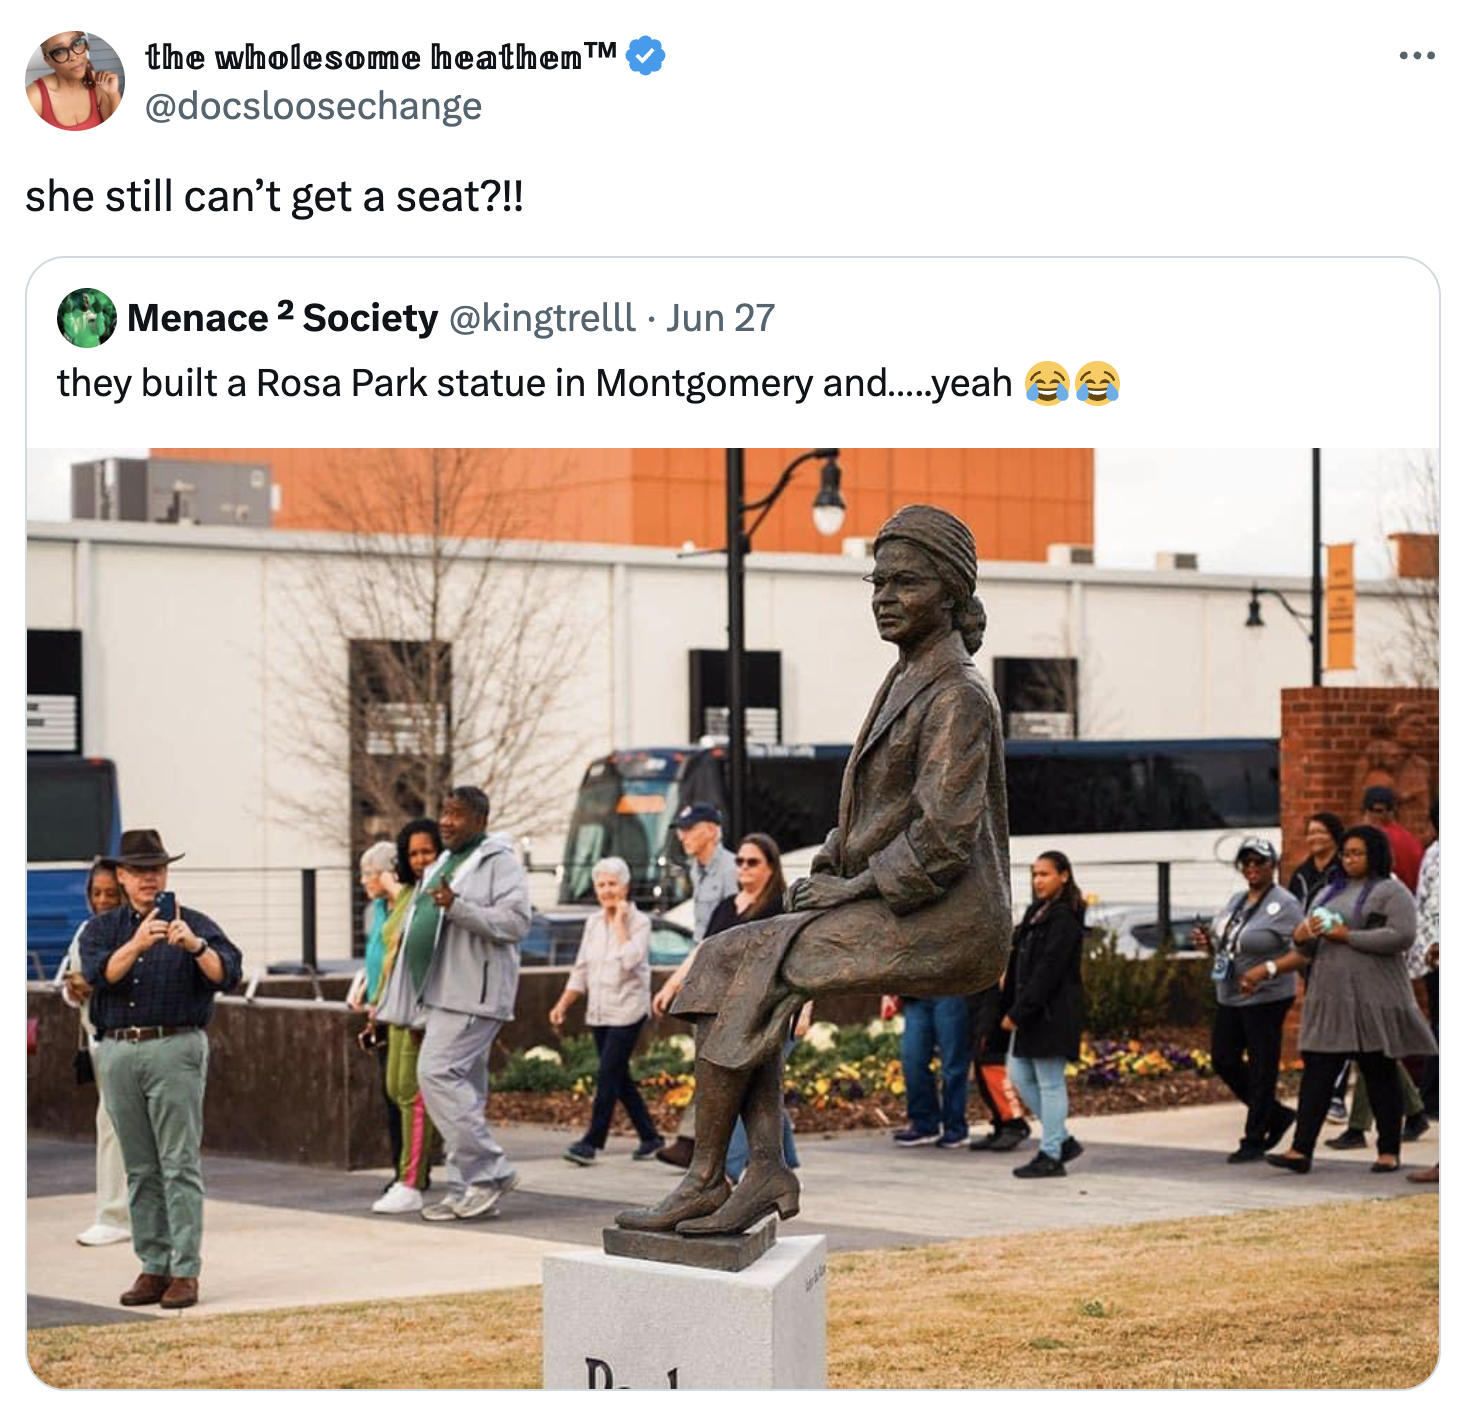 statue - . the wholesome heathen she still can't get a seat?!! Menace 2 Society Jun 27 they built a Rosa Park statue in Montgomery and.....yeah